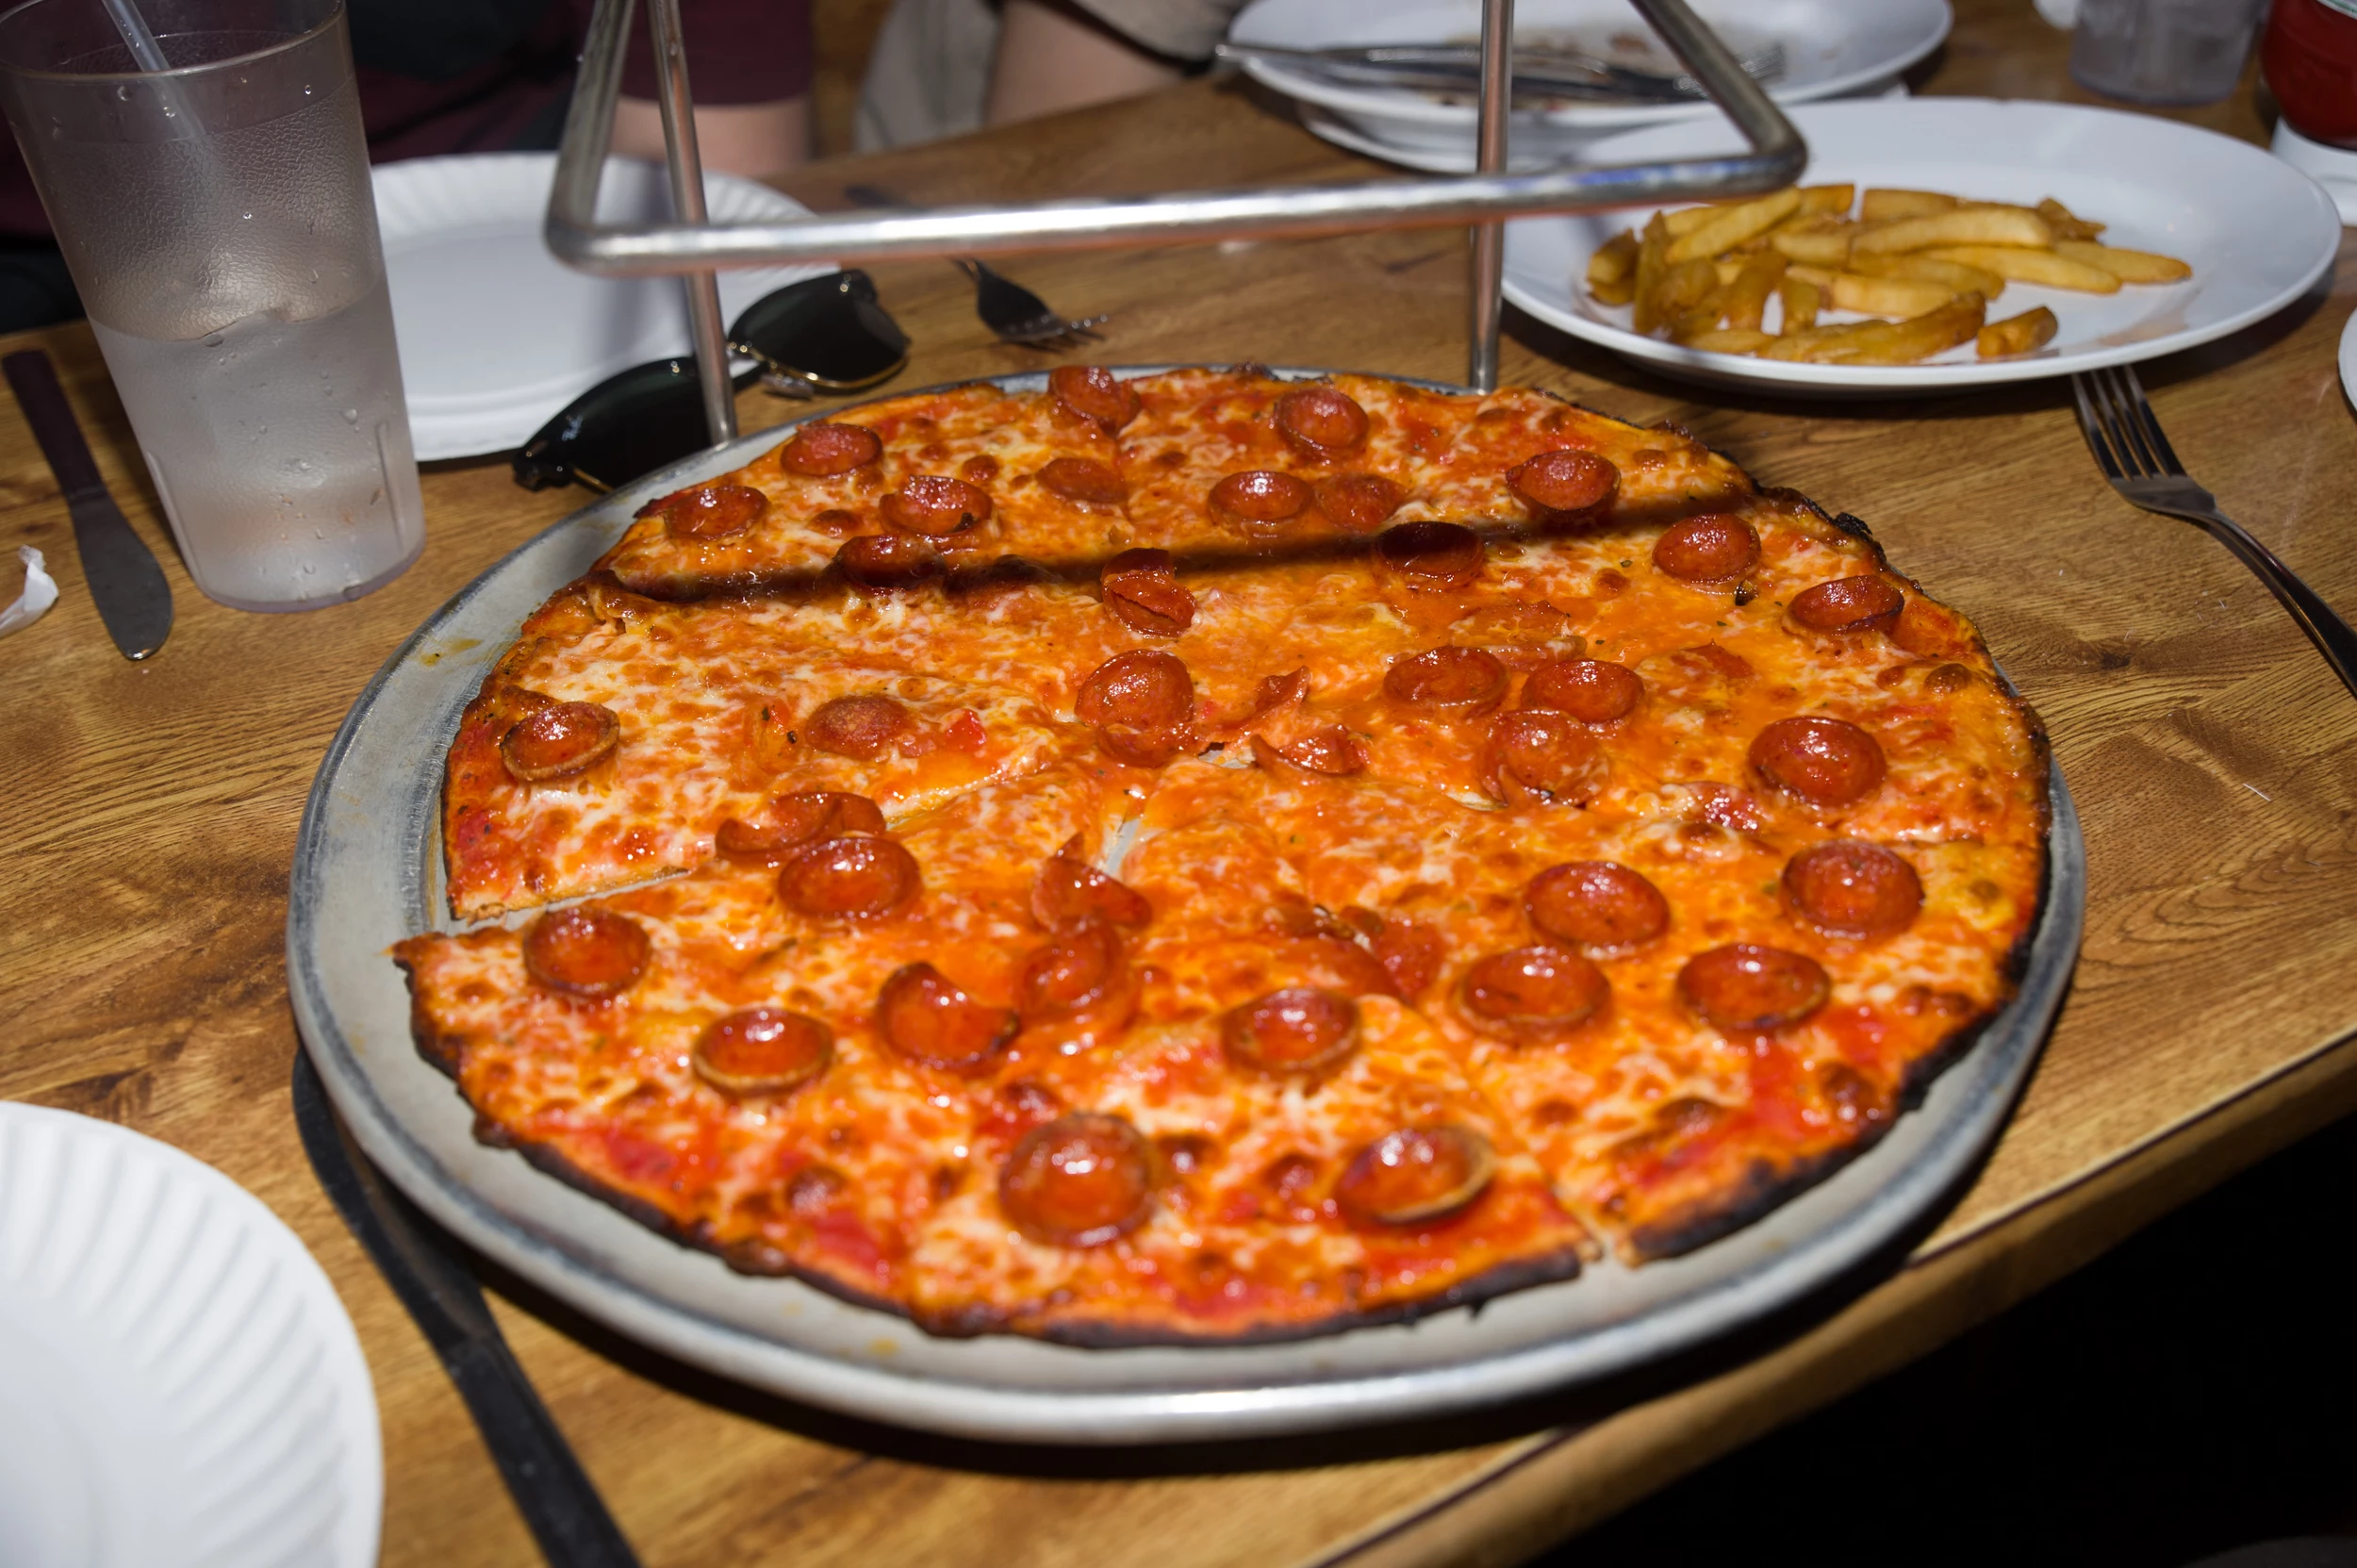 It's true, New Jersey is the 'pizza capital of the world